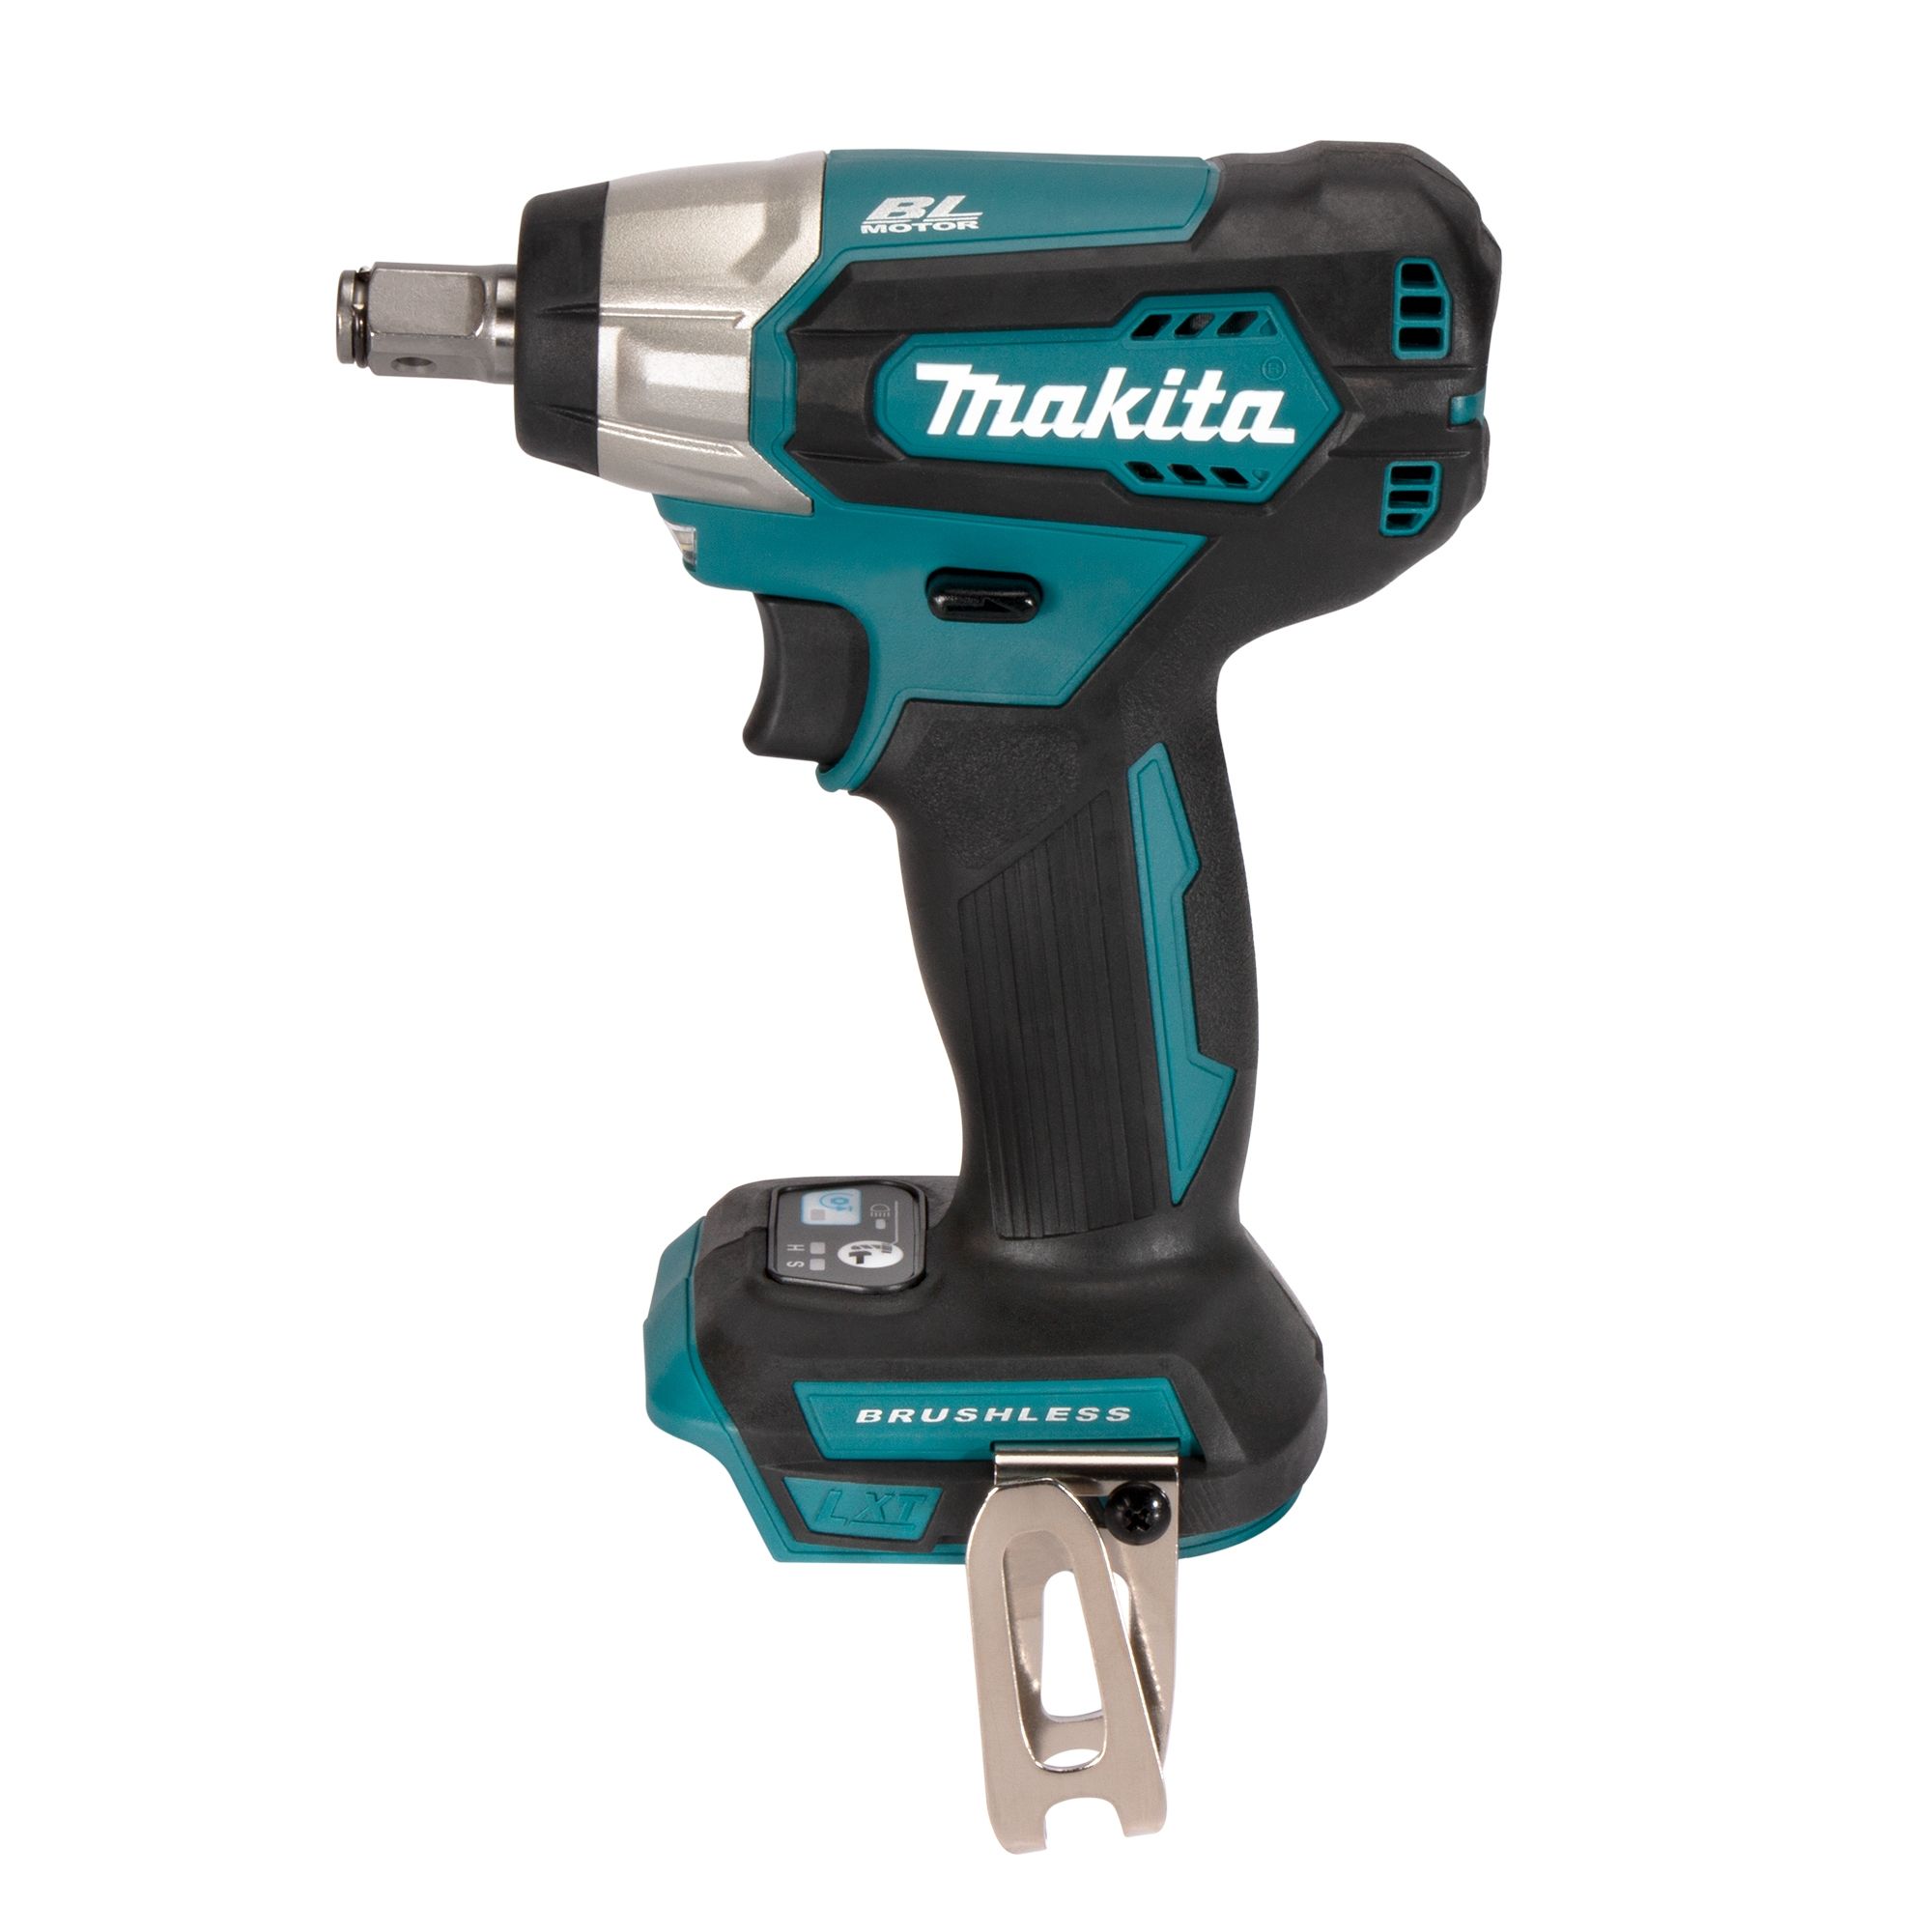 Makita dtw181z Screwdriver Pulse Brushless 18v 1/2" 210nm without Battery 